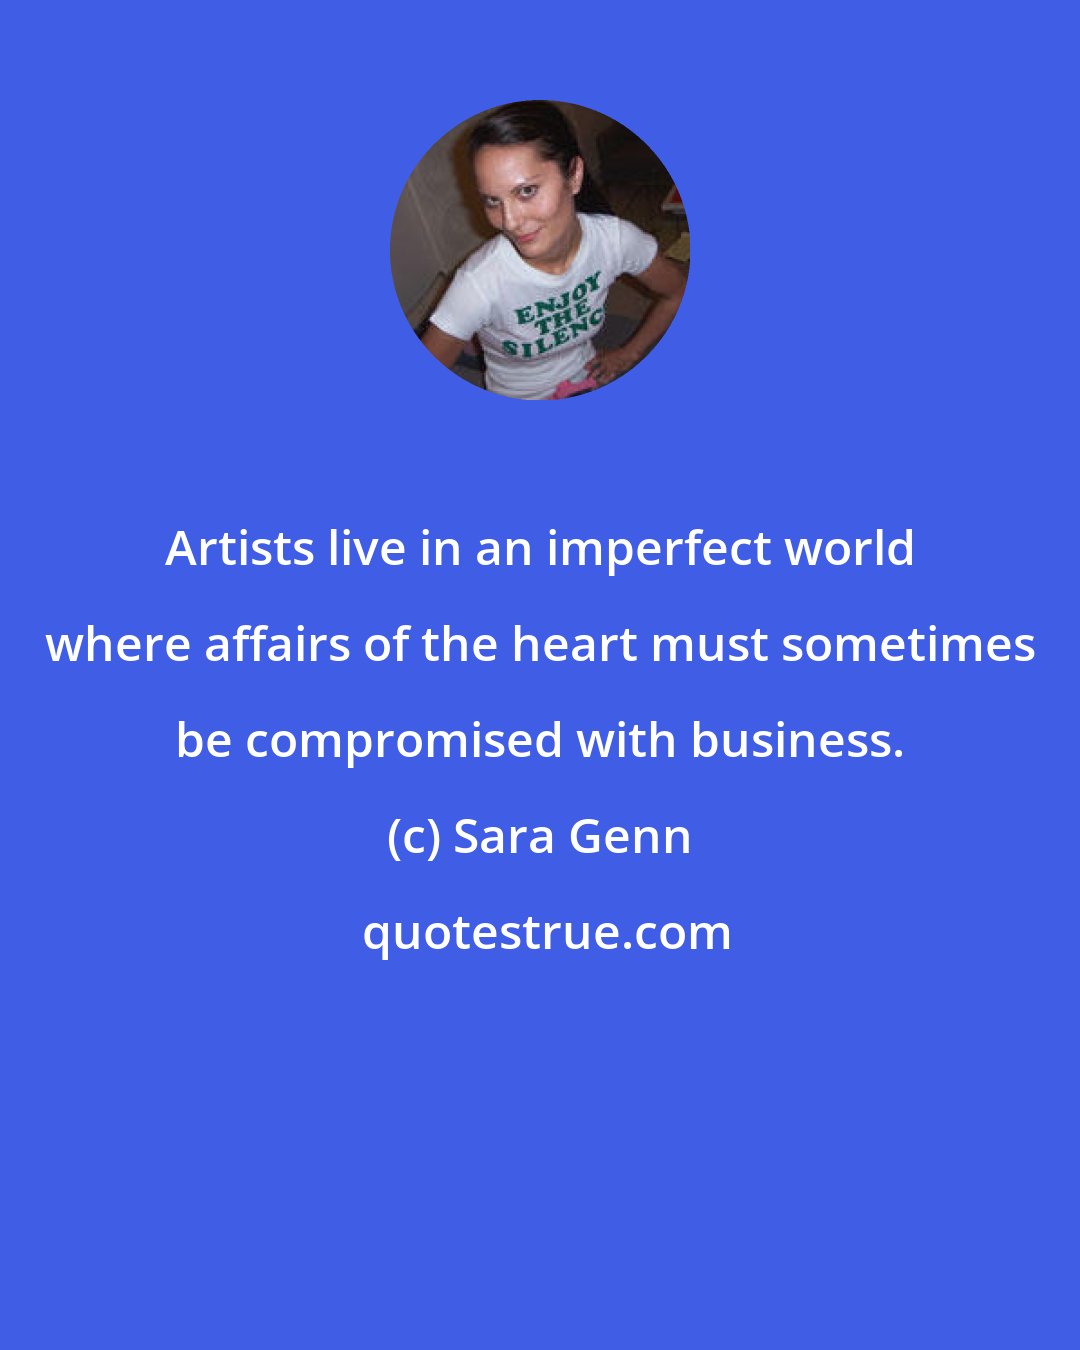 Sara Genn: Artists live in an imperfect world where affairs of the heart must sometimes be compromised with business.